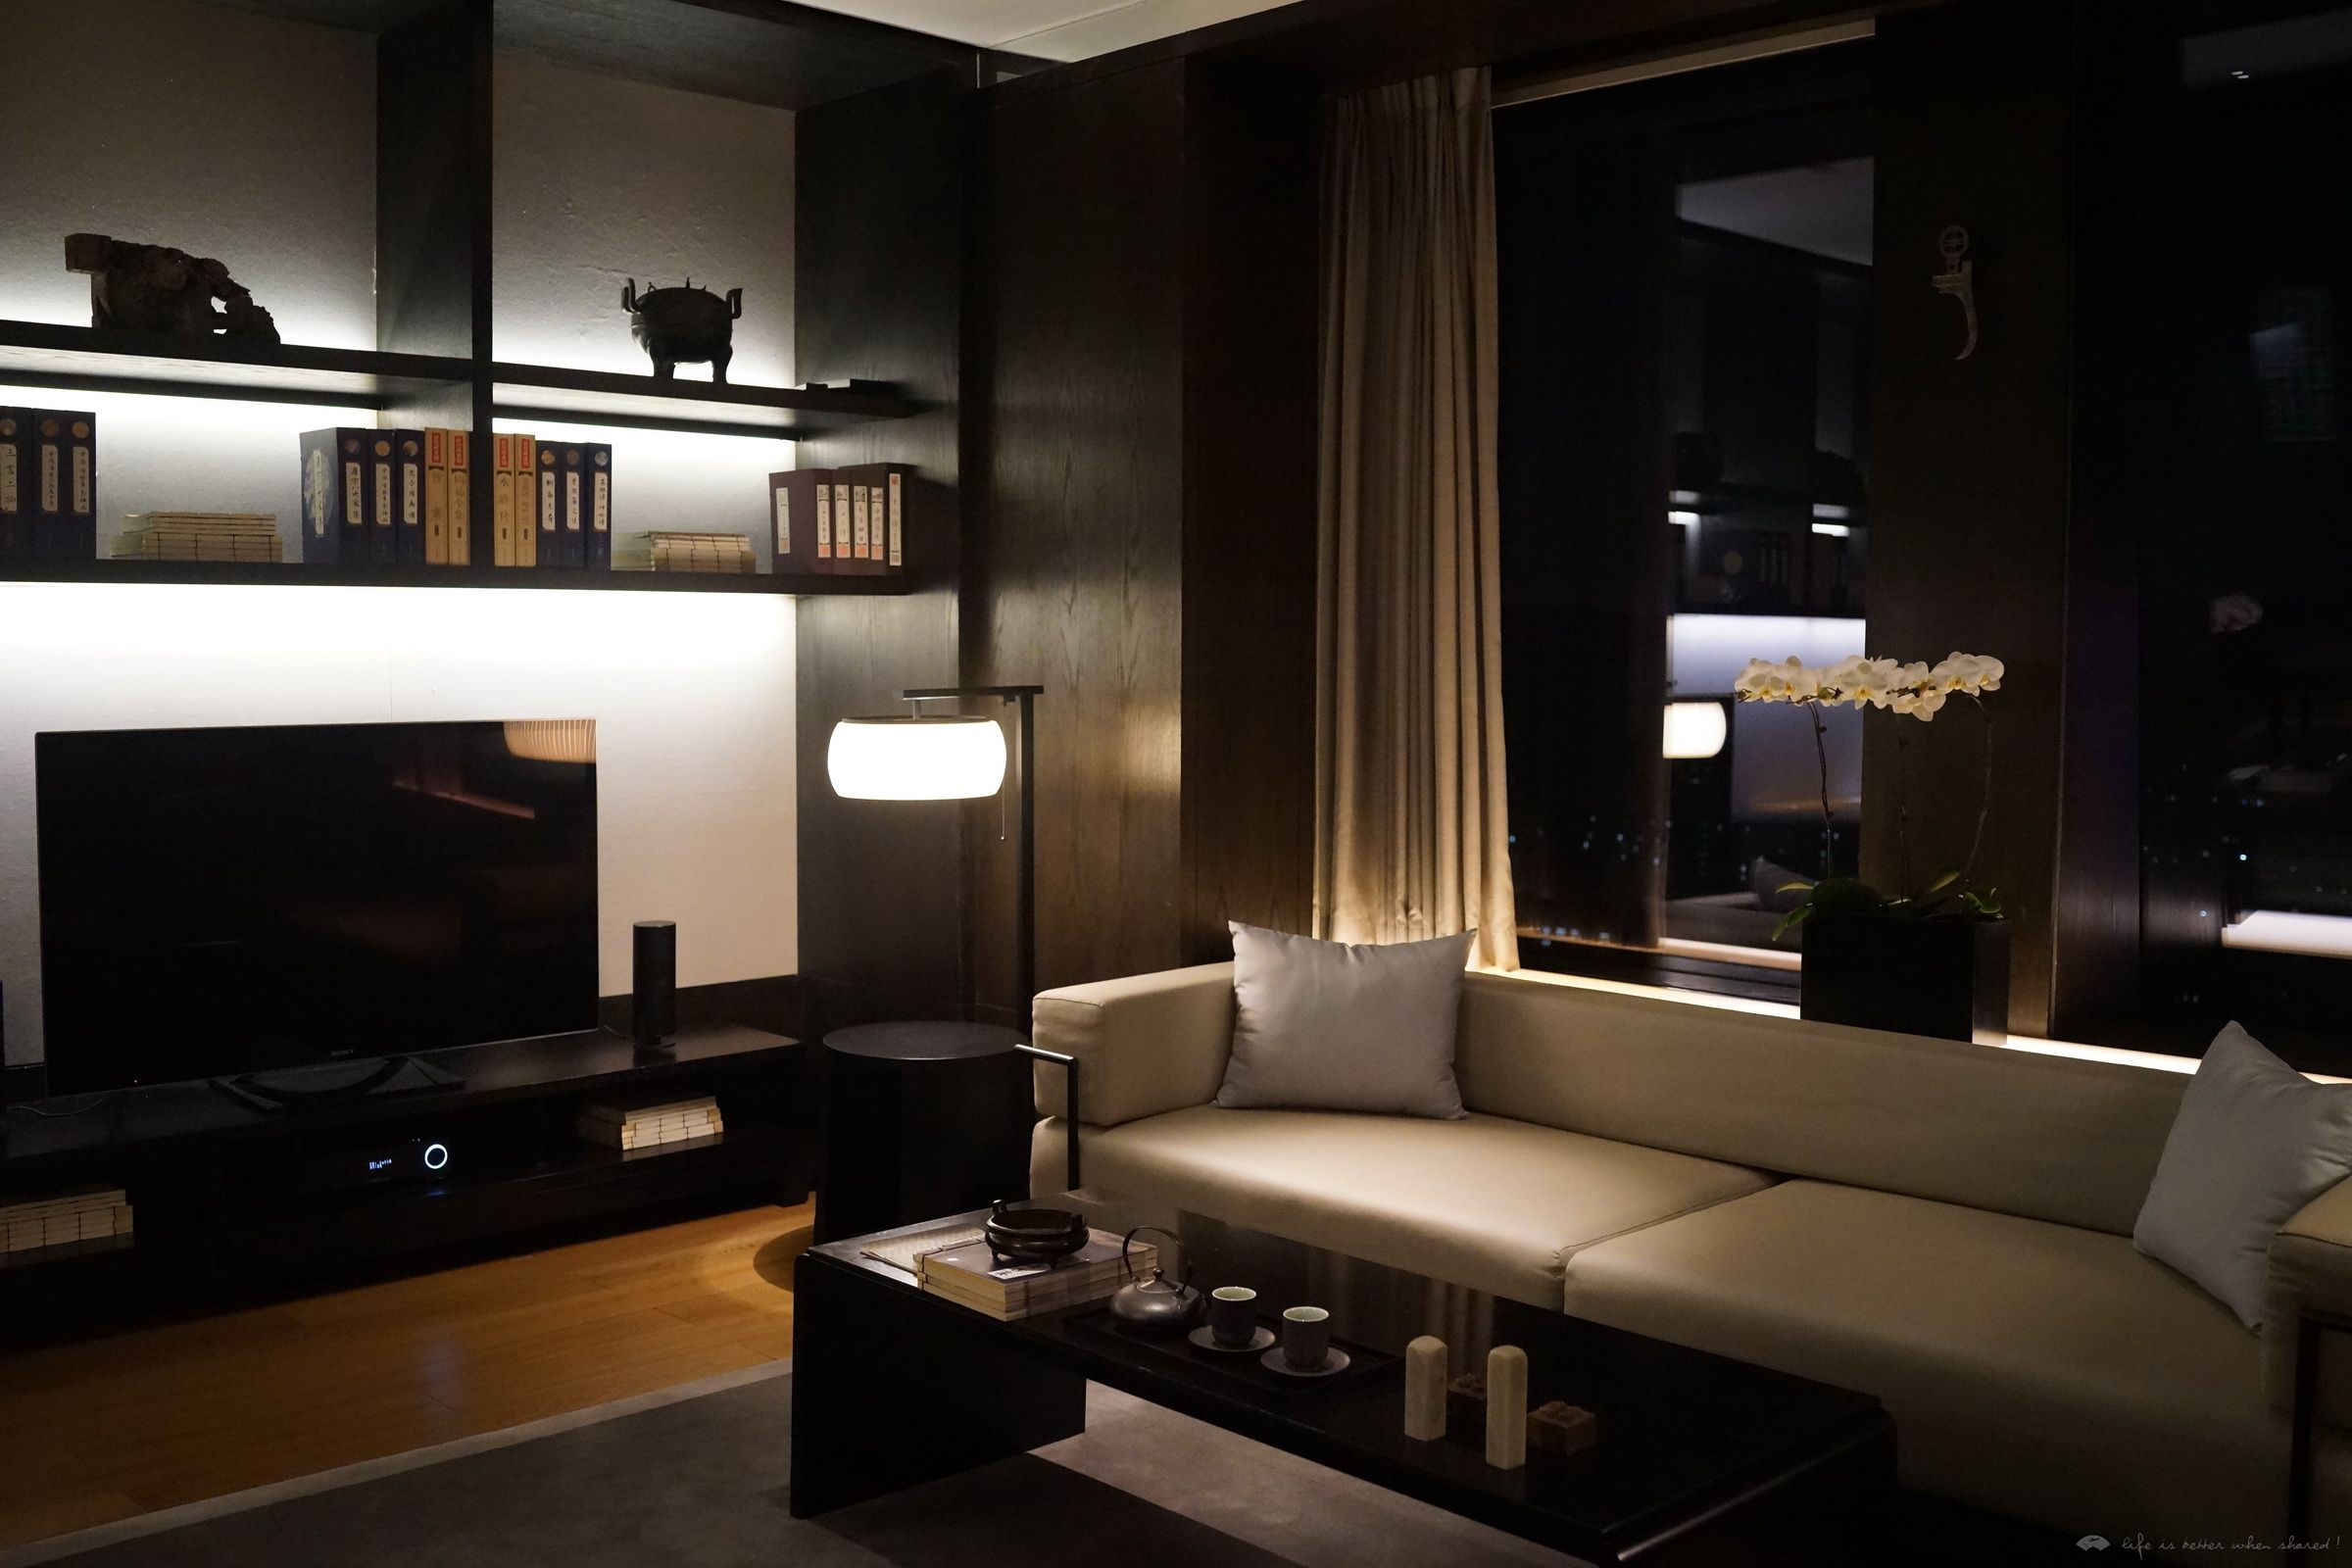 [] Club Deluxe Suite @ The Puyu Hotel and Spa | 褻׷@人褾Ƶ